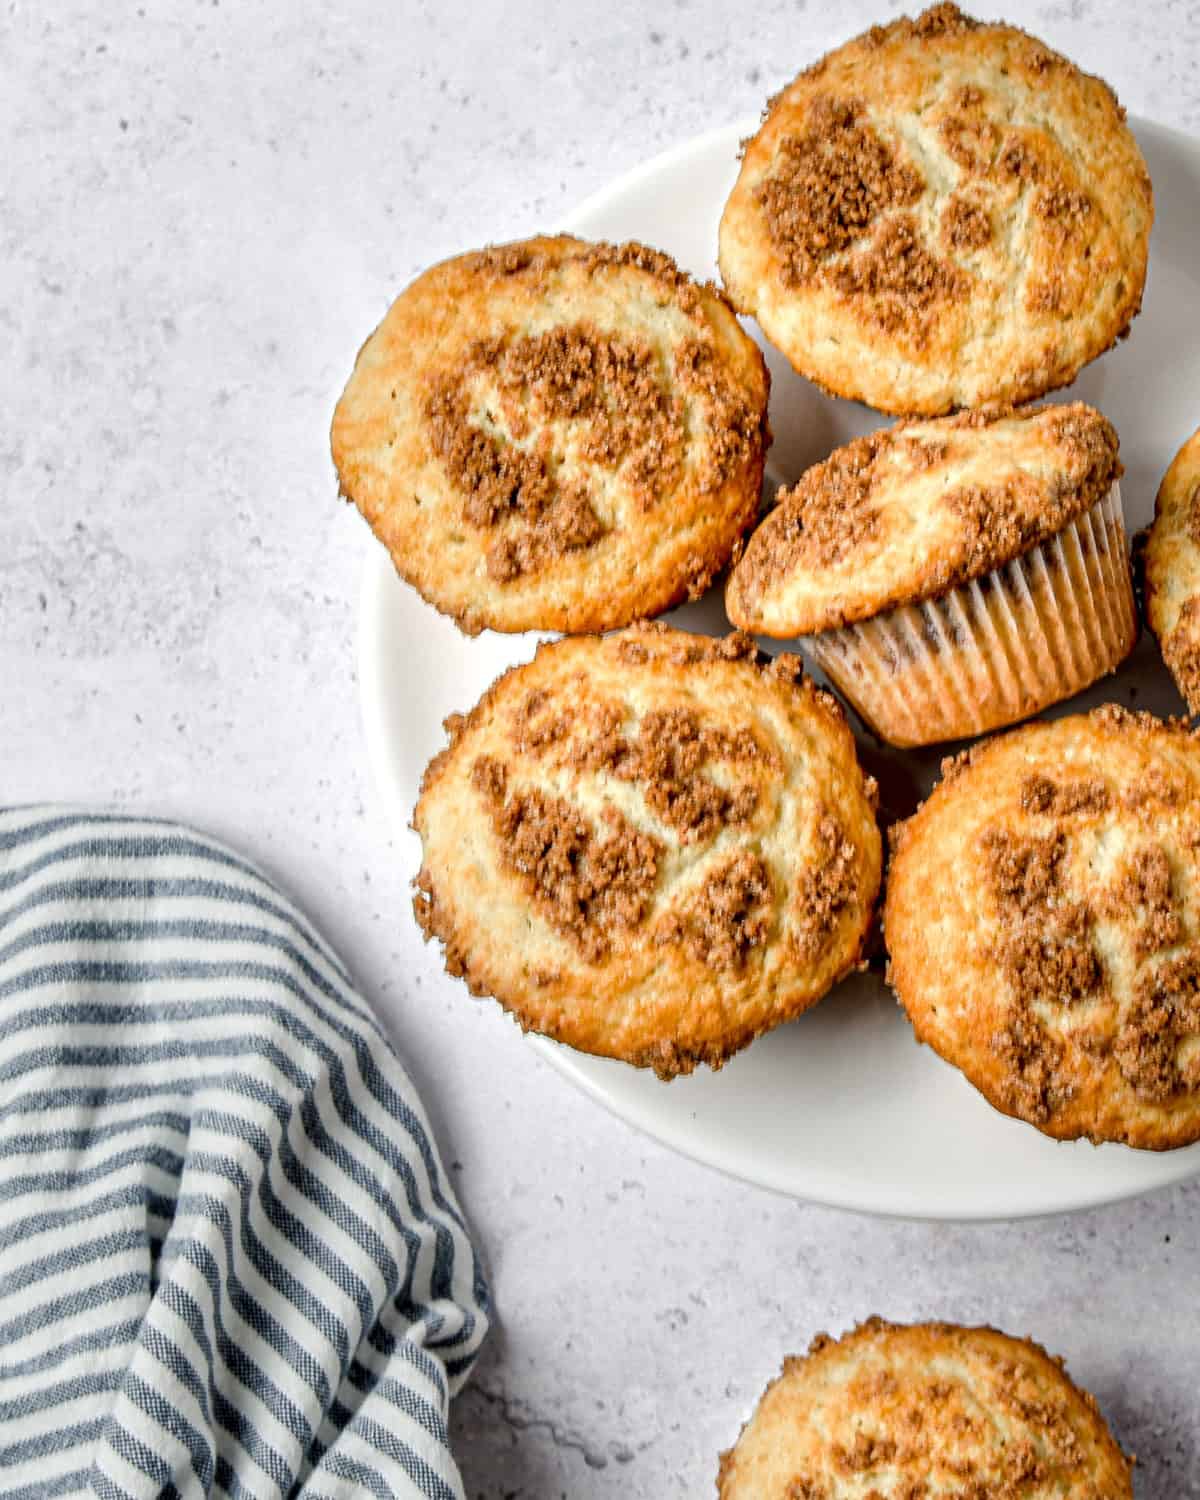 Cinnamon streusel muffins on a white plate.